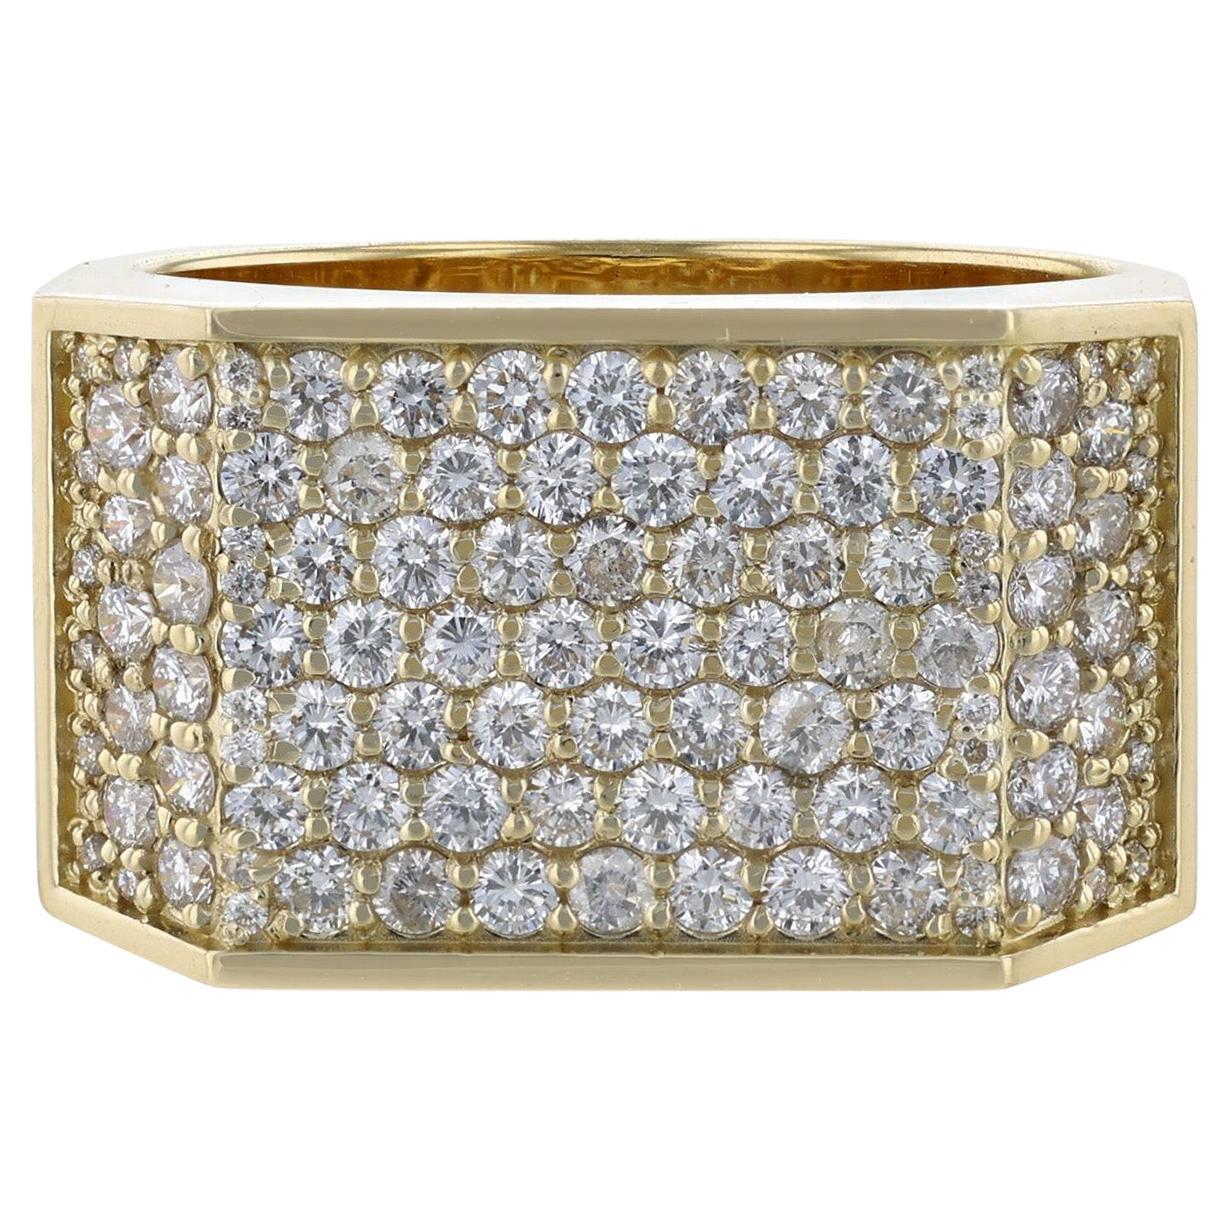 This men’s ring is 14K white gold and features 160 round cut diamonds. All stones are pave set and weigh 1.87 carats combined. The ring has a color grade of (H) and a clarity grade of (SI2).
